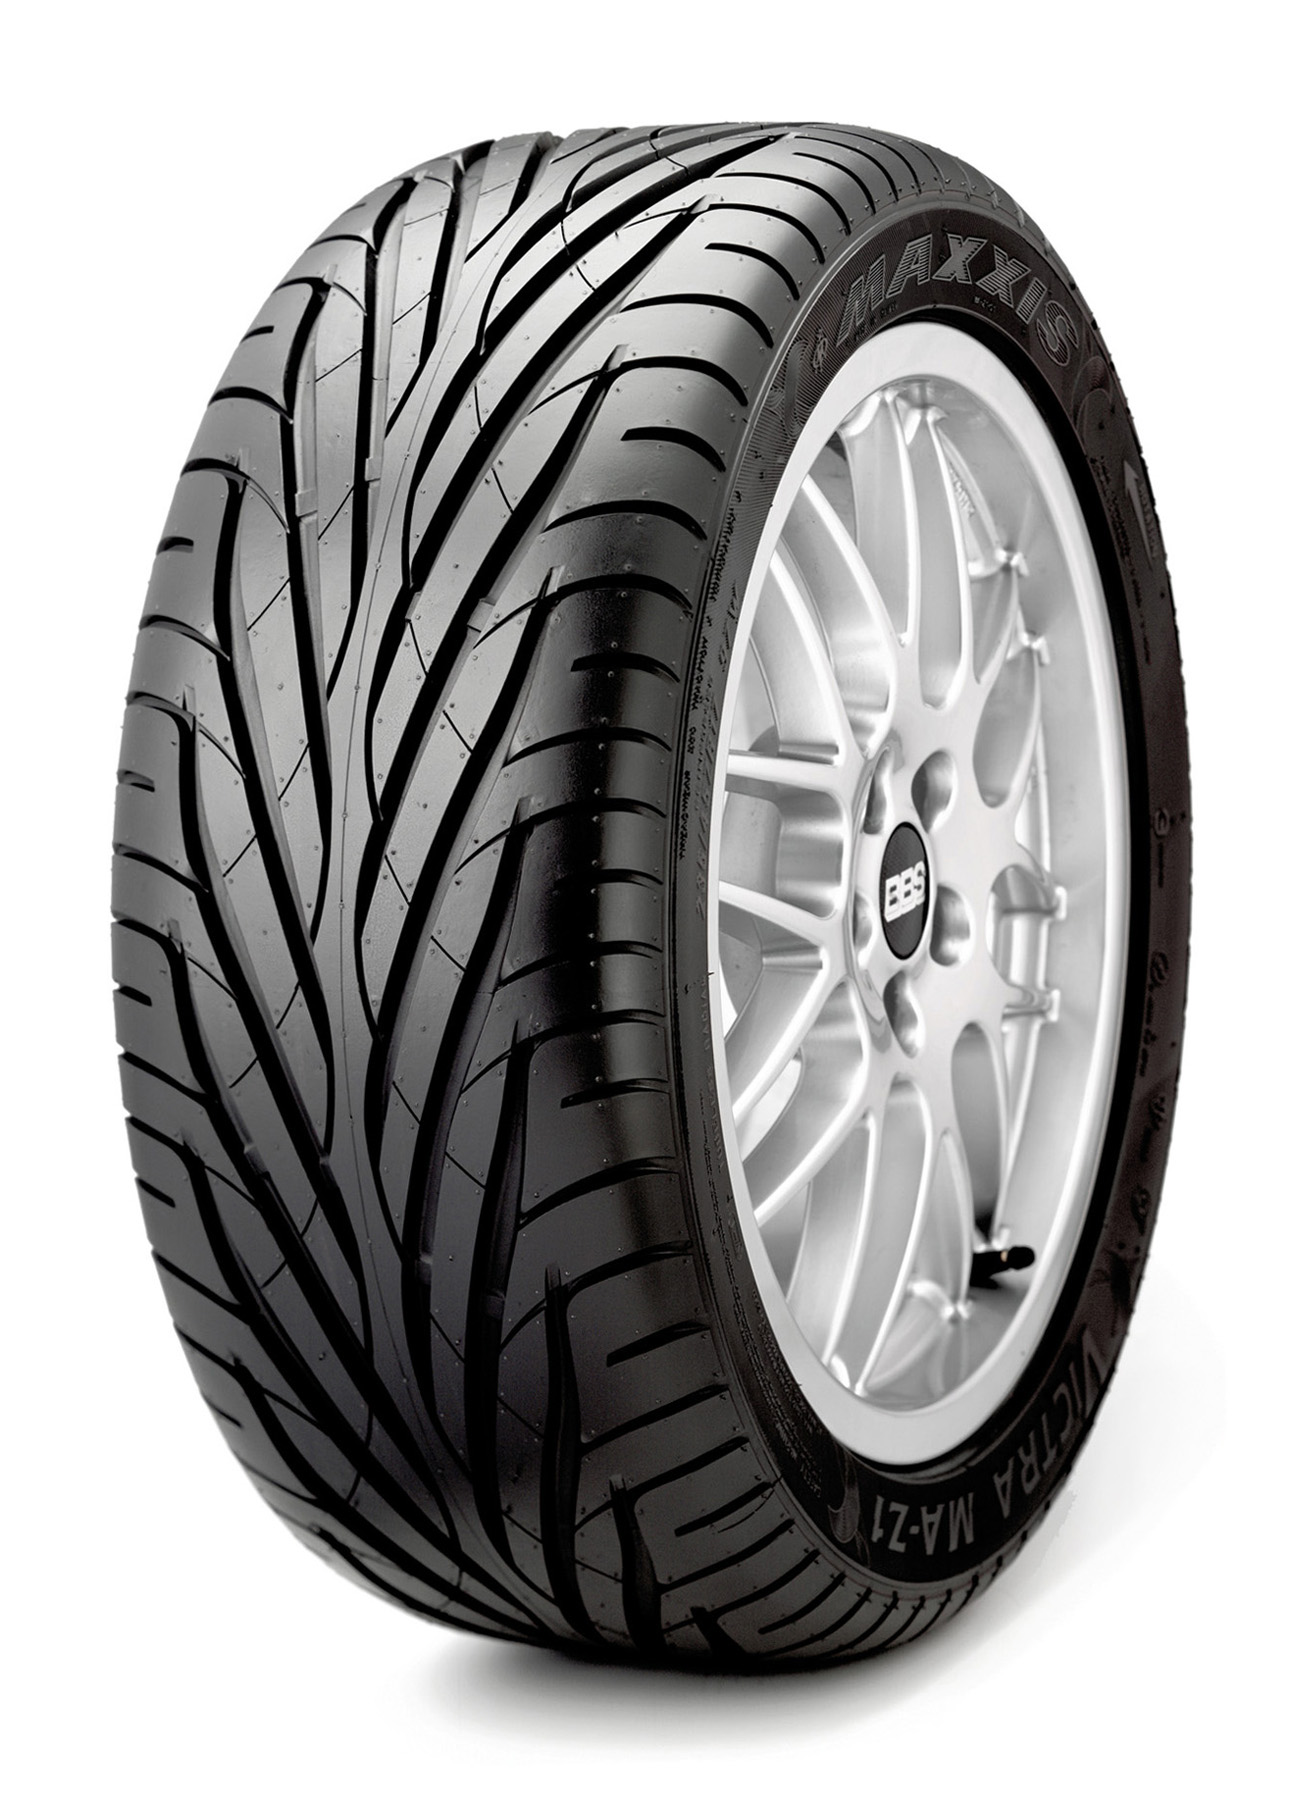 Maxxis отзывы лето. Maxxis ma-z1 Victra. 195/50r15, Maxxis ma-z1 Victra 86v. Maxxis ma-z1 94w. Maxxis 195/50r15 ma-z4 Victra.